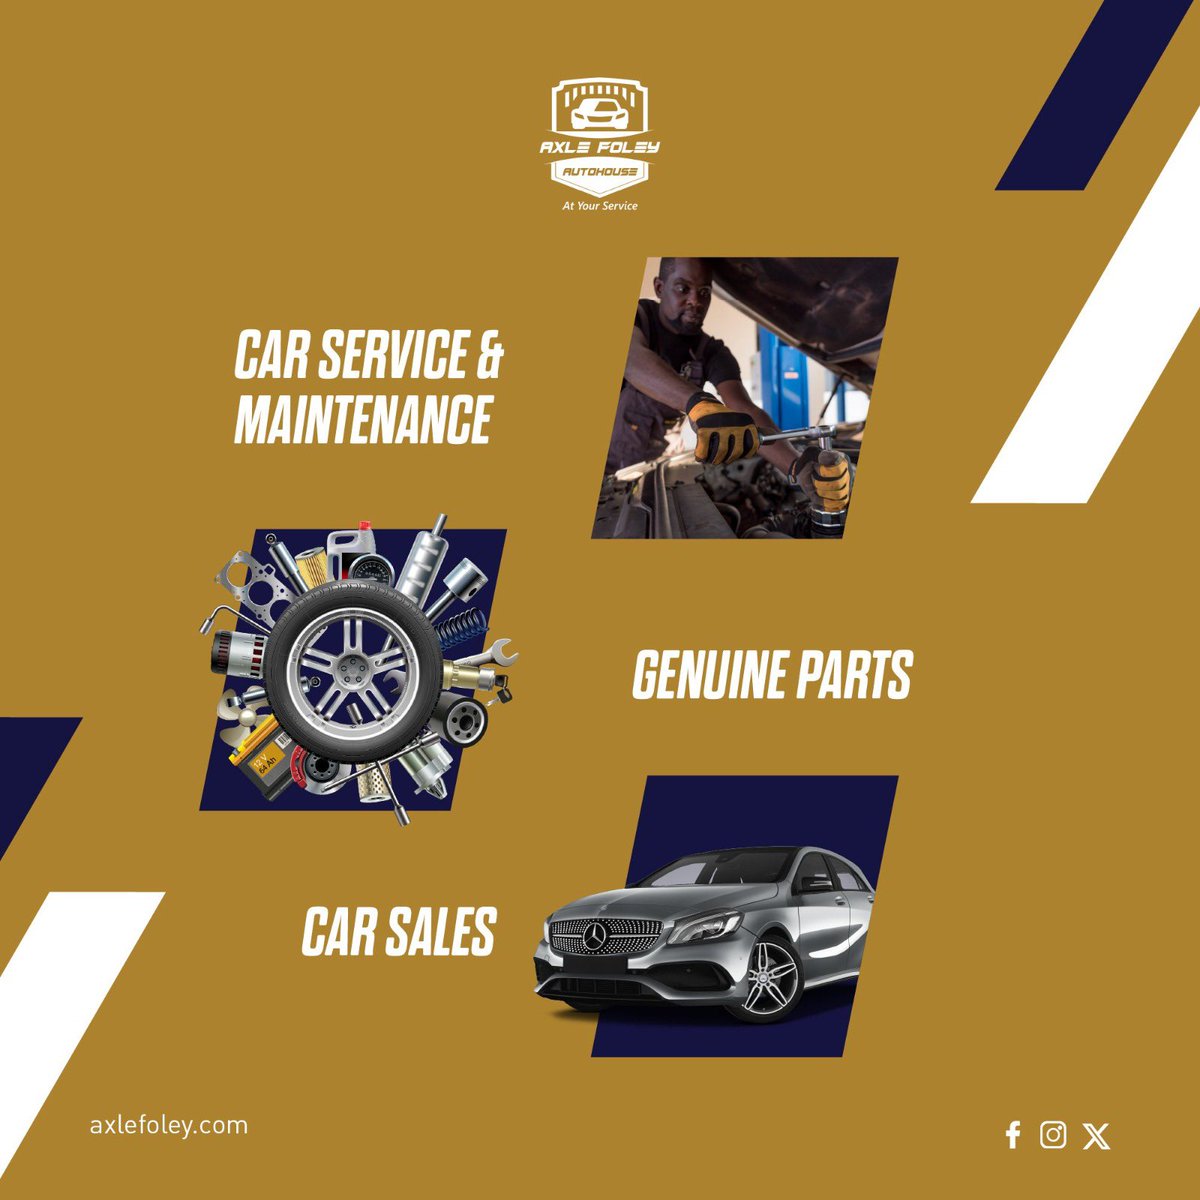 Here's a list of the extensive services for when you drive into the @Axle_Foley_ headquarters! Each service is delivered meticulously & professionally to ensure you're good on the road for a long time. Visit axlefoley.com or WhatsApp them on 0393248791 to book…